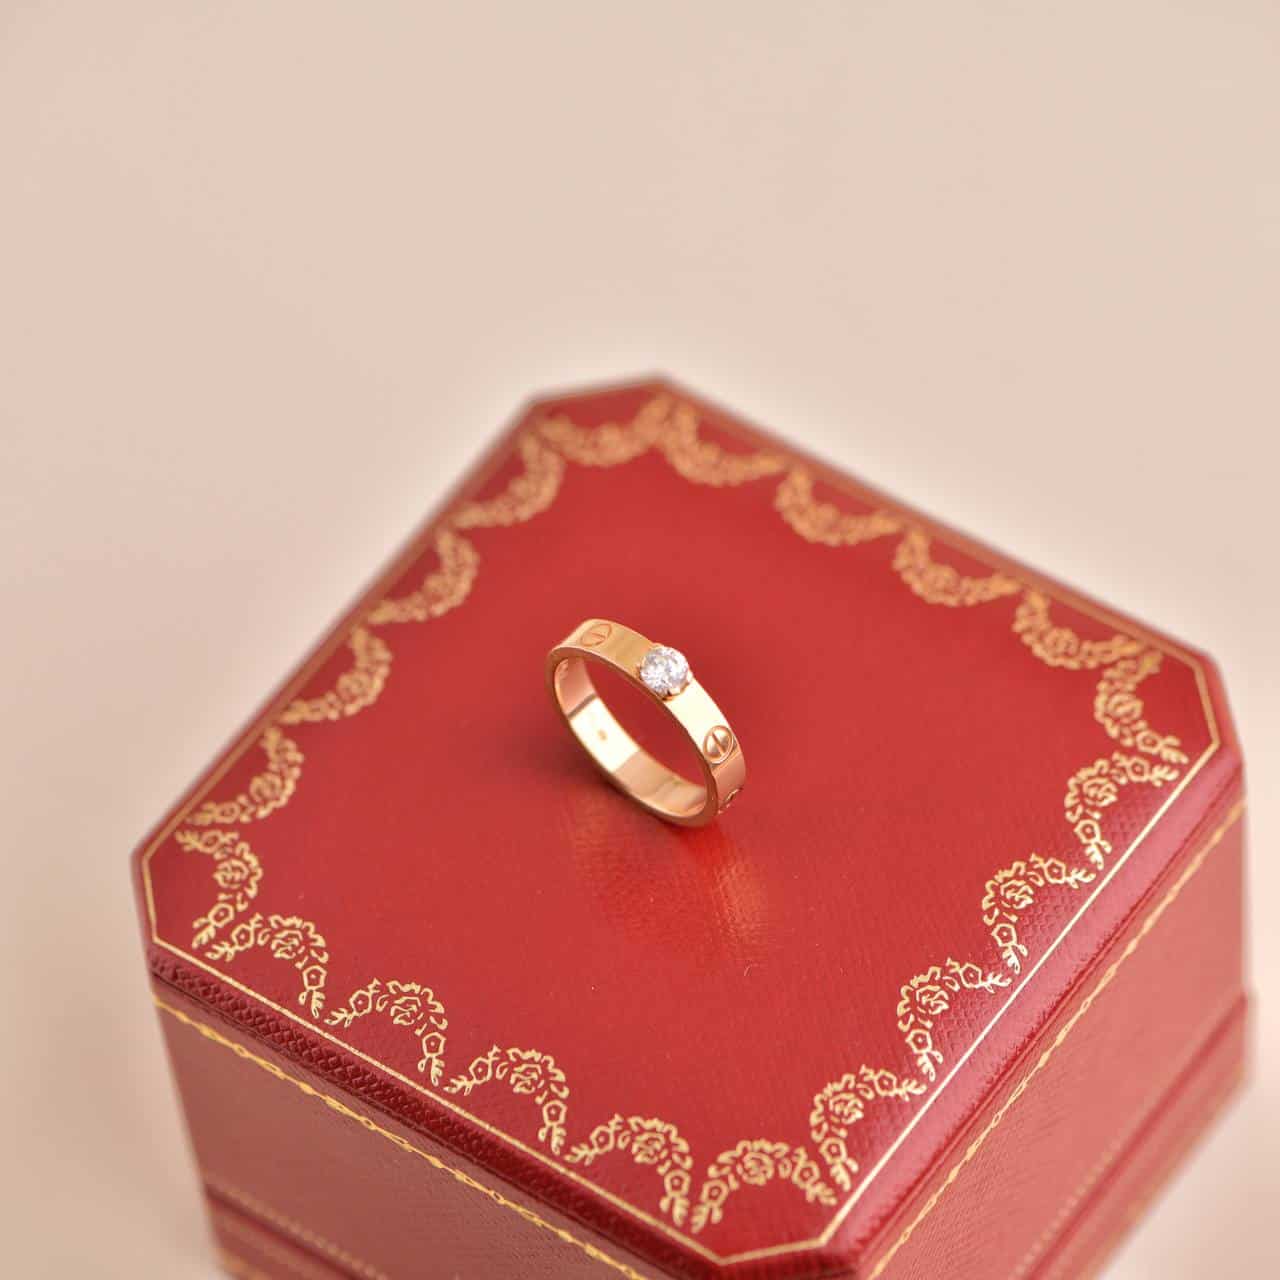 Cartier LOVE Solitaire Rose Gold Diamond Ring Size 52